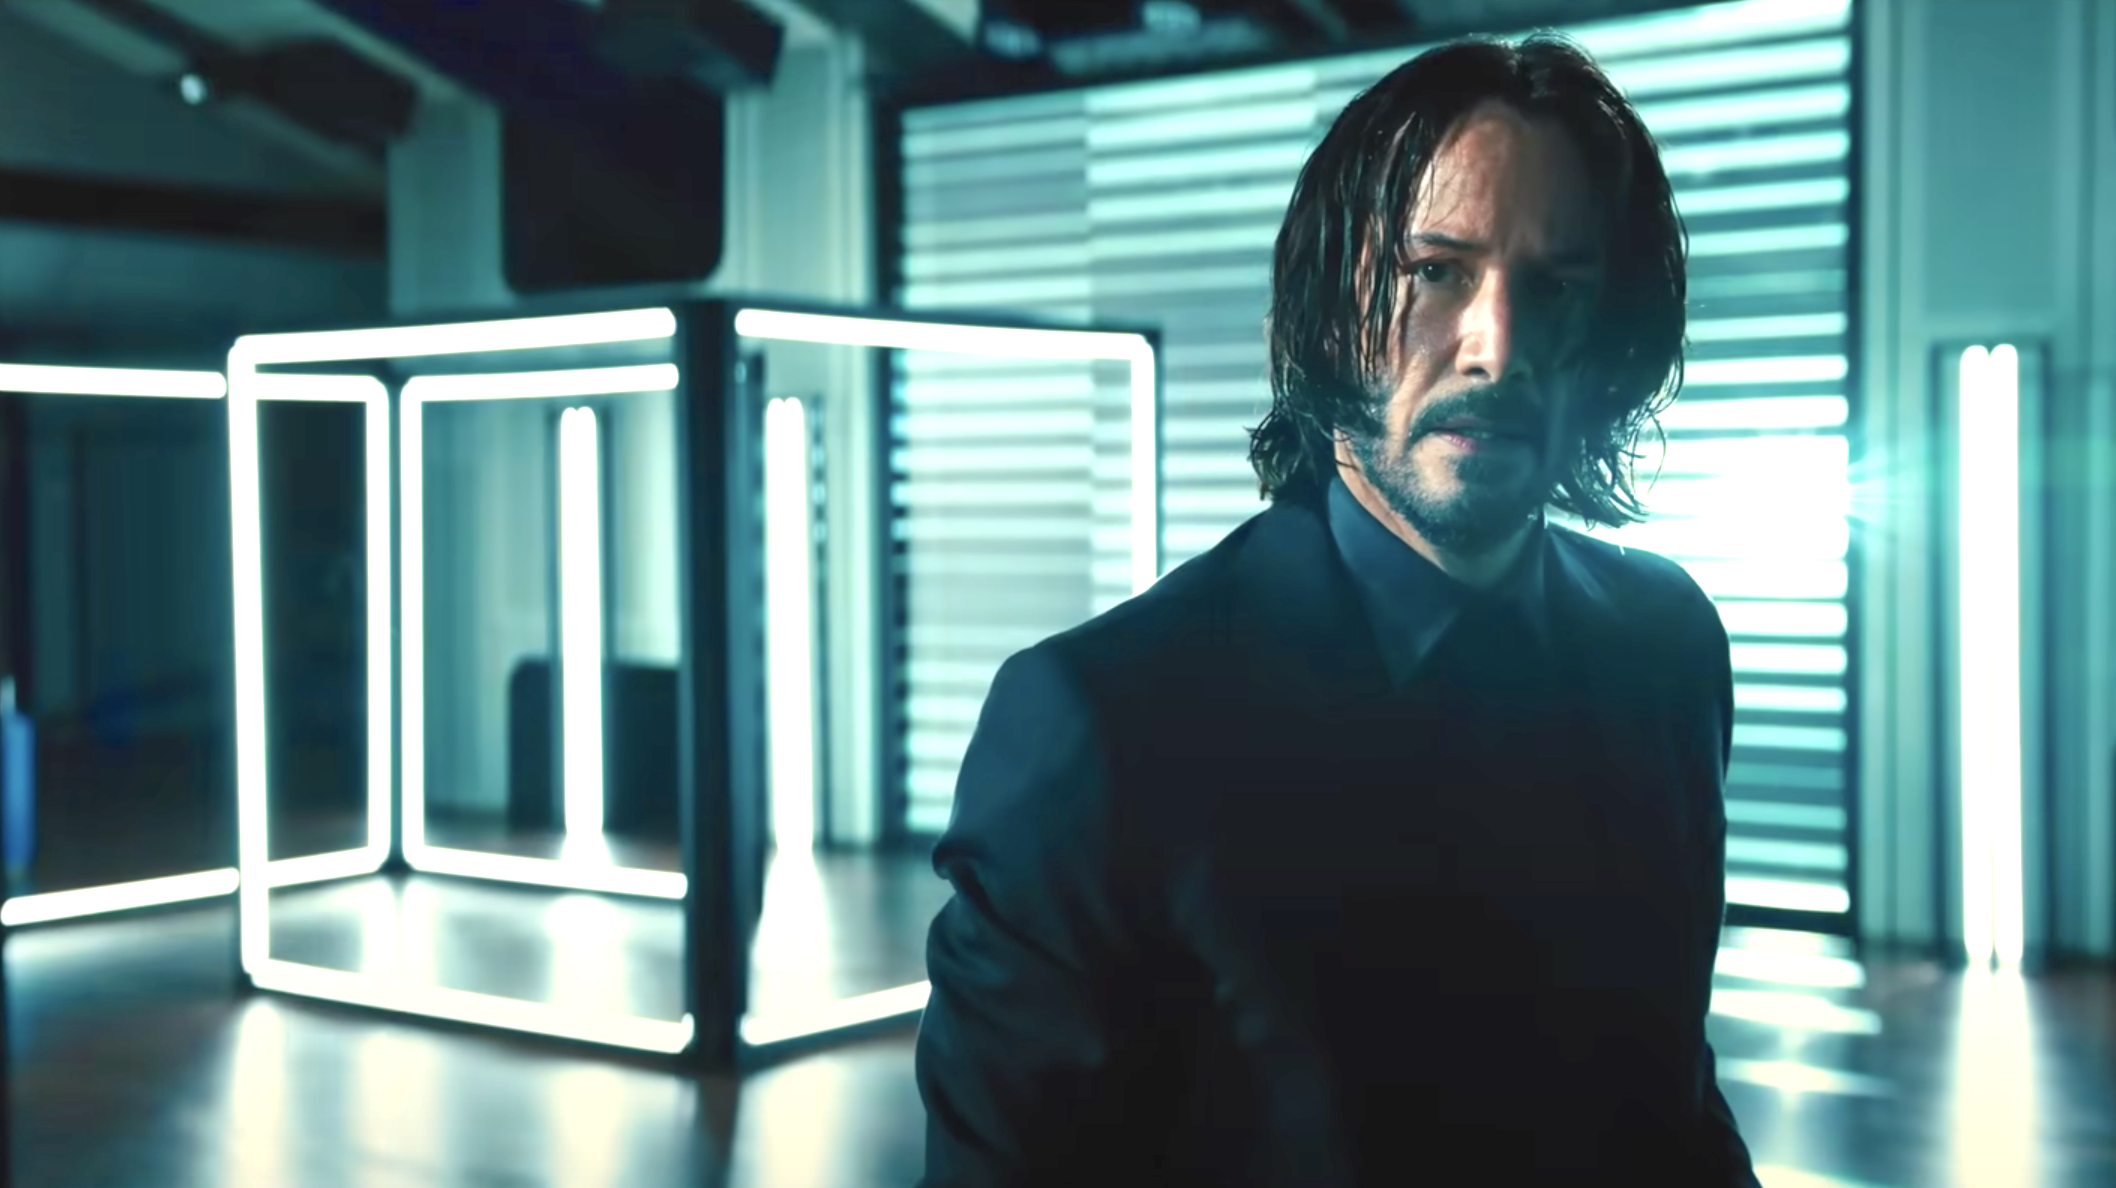 John Wick 4 Teaser Trailer Premieres at Comic-Con: Watch